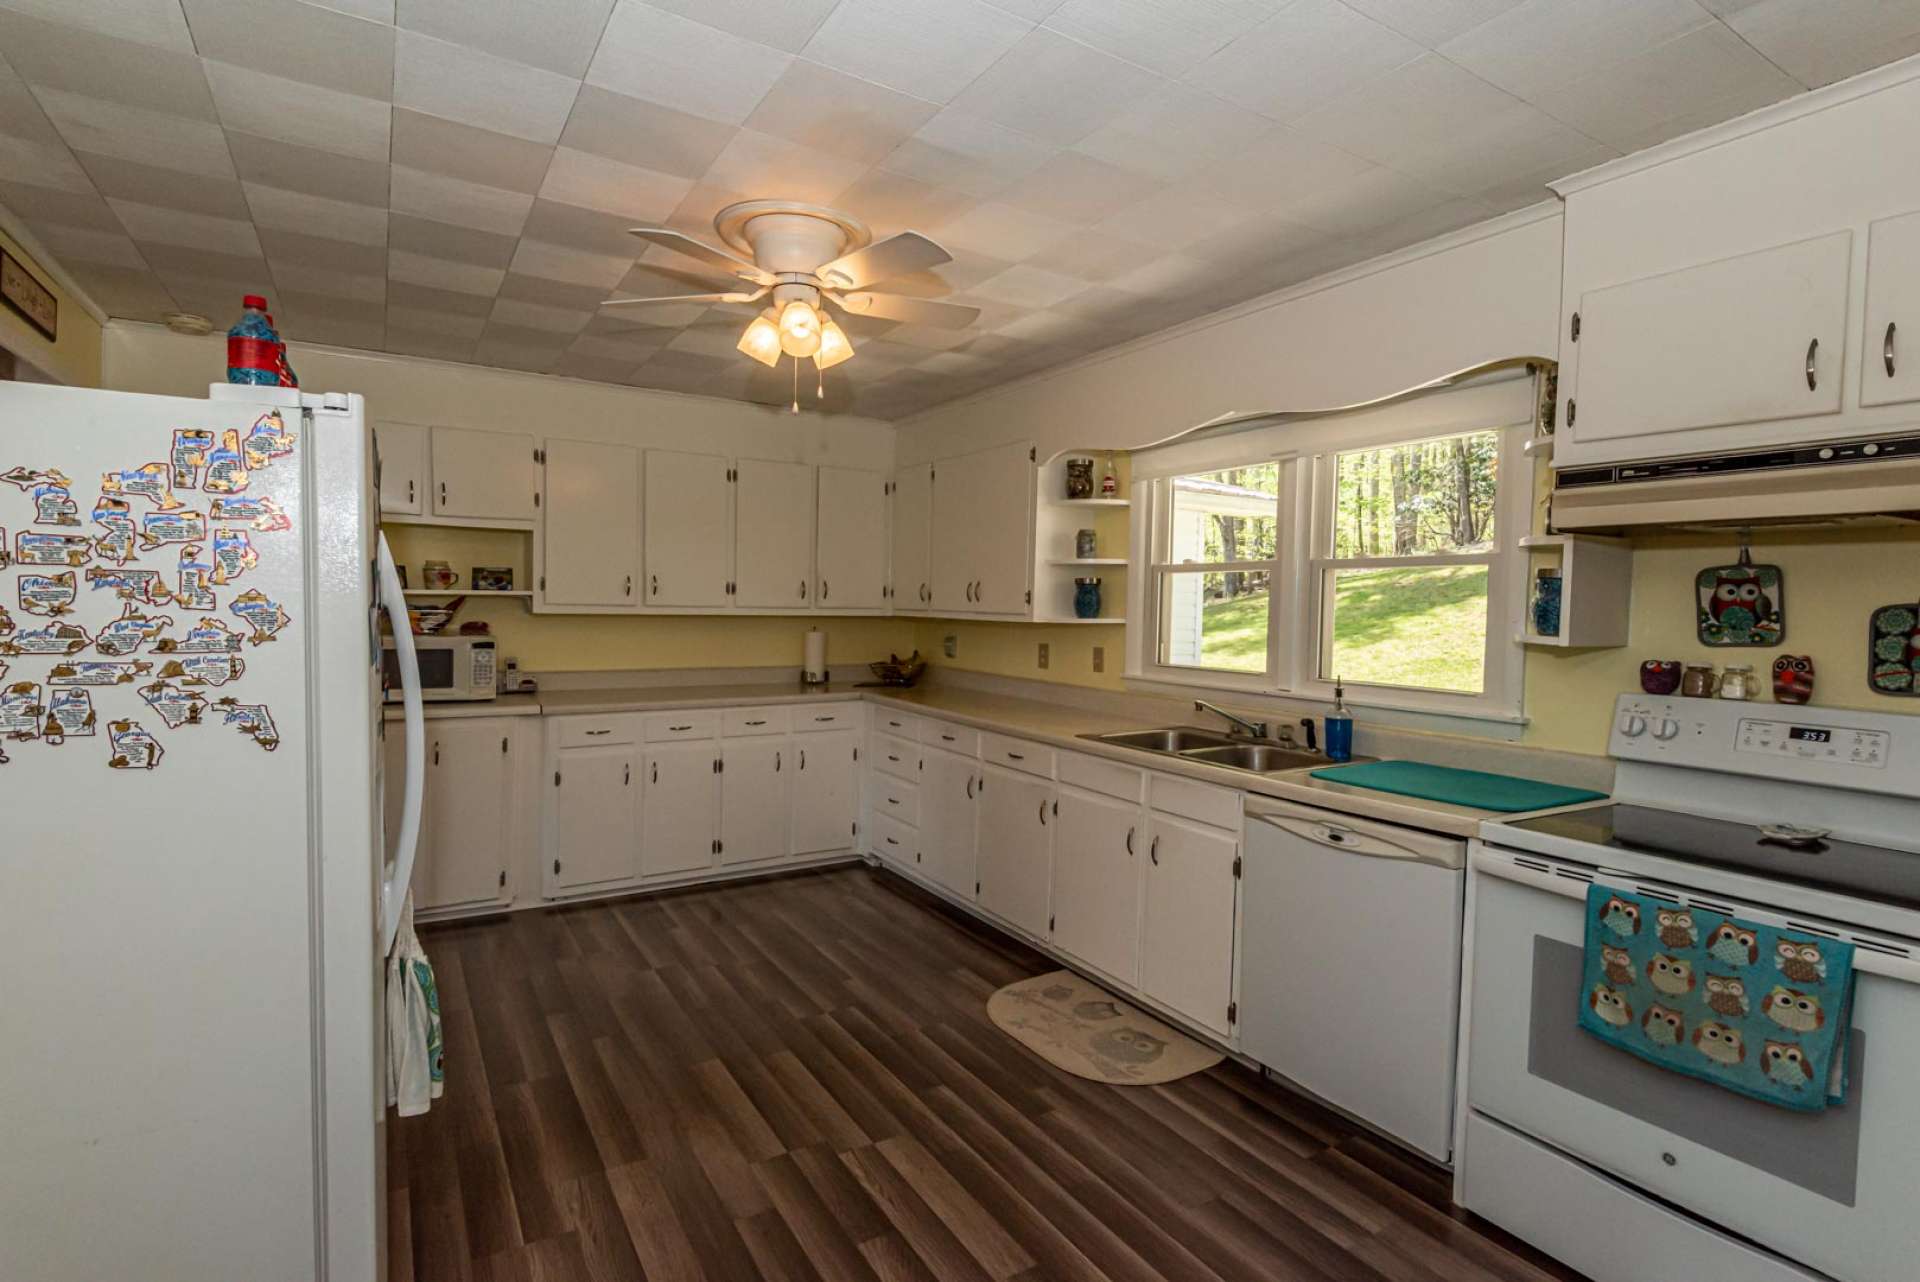 There is plenty of work and storage space in this spacious country kitchen.